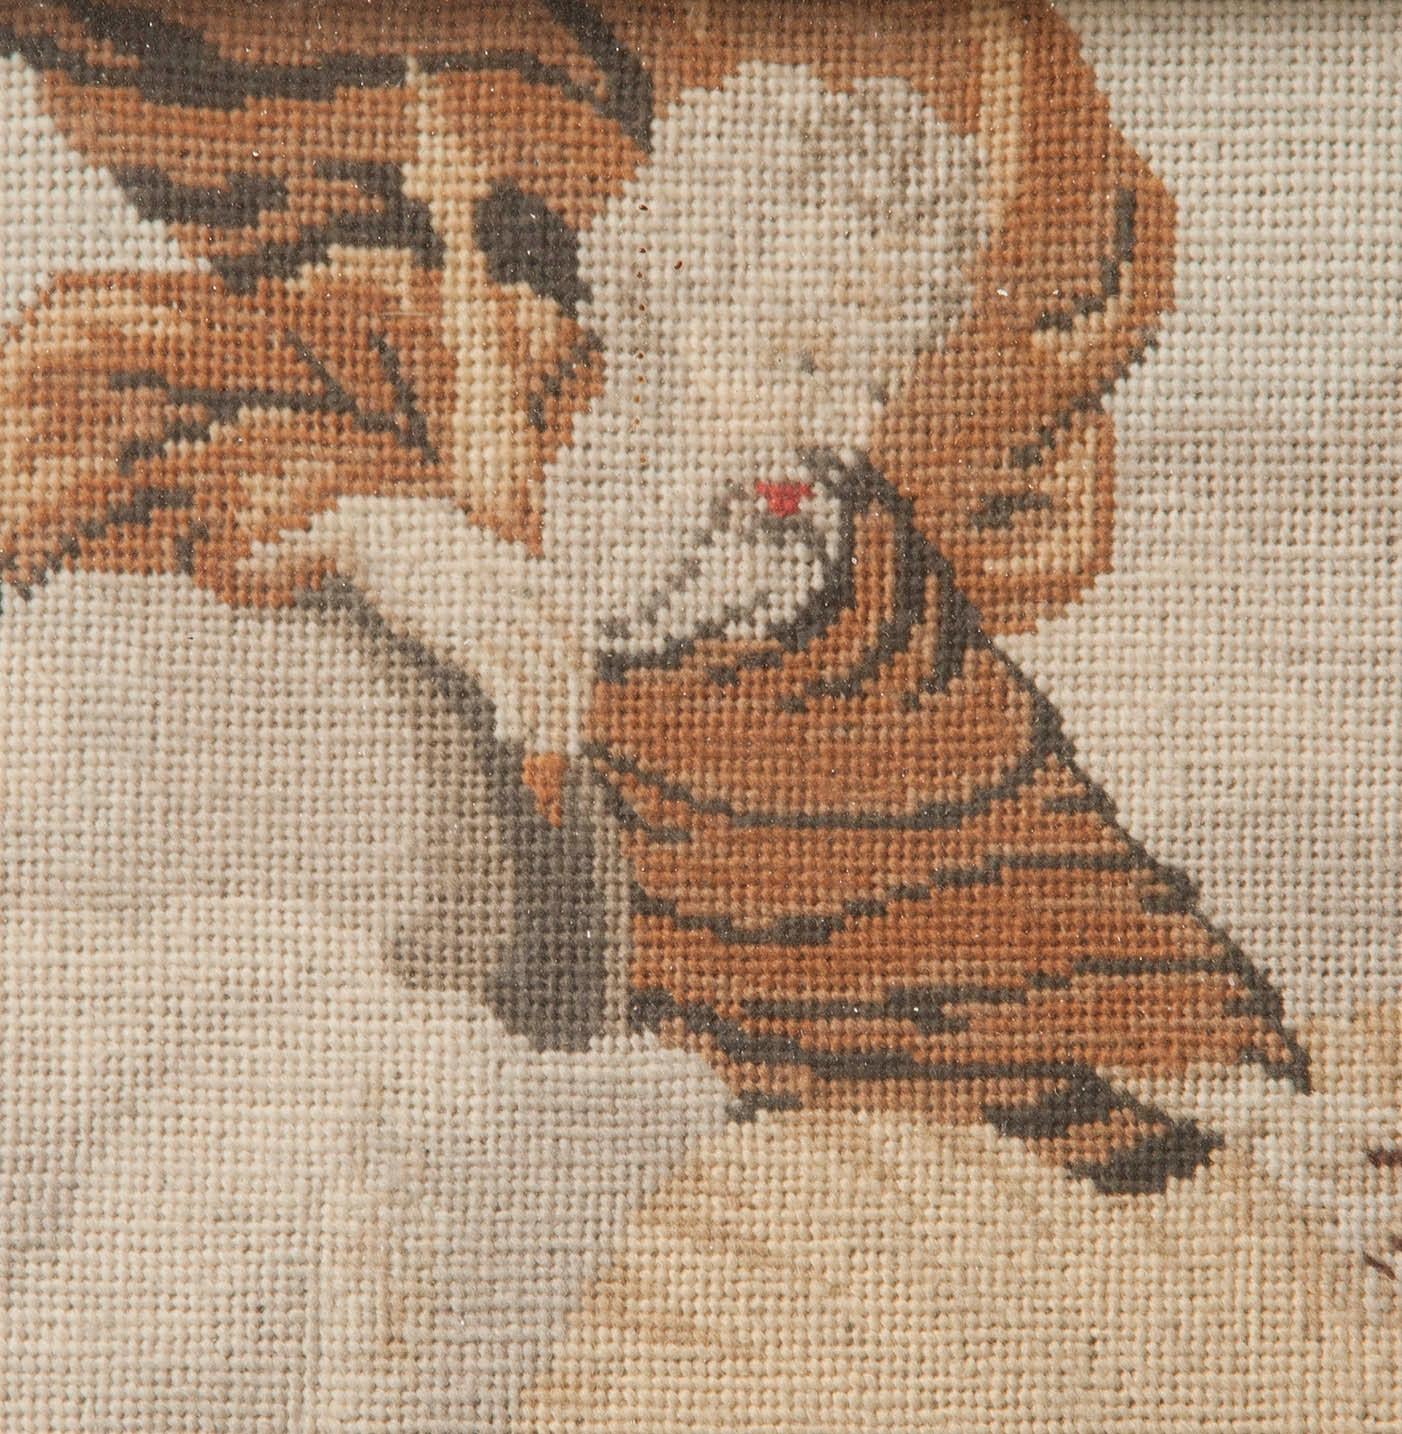 Early 19th Century Annunciation to the Blessed Virgin Mary Needlepoint Tapestry, France, 1850-1870